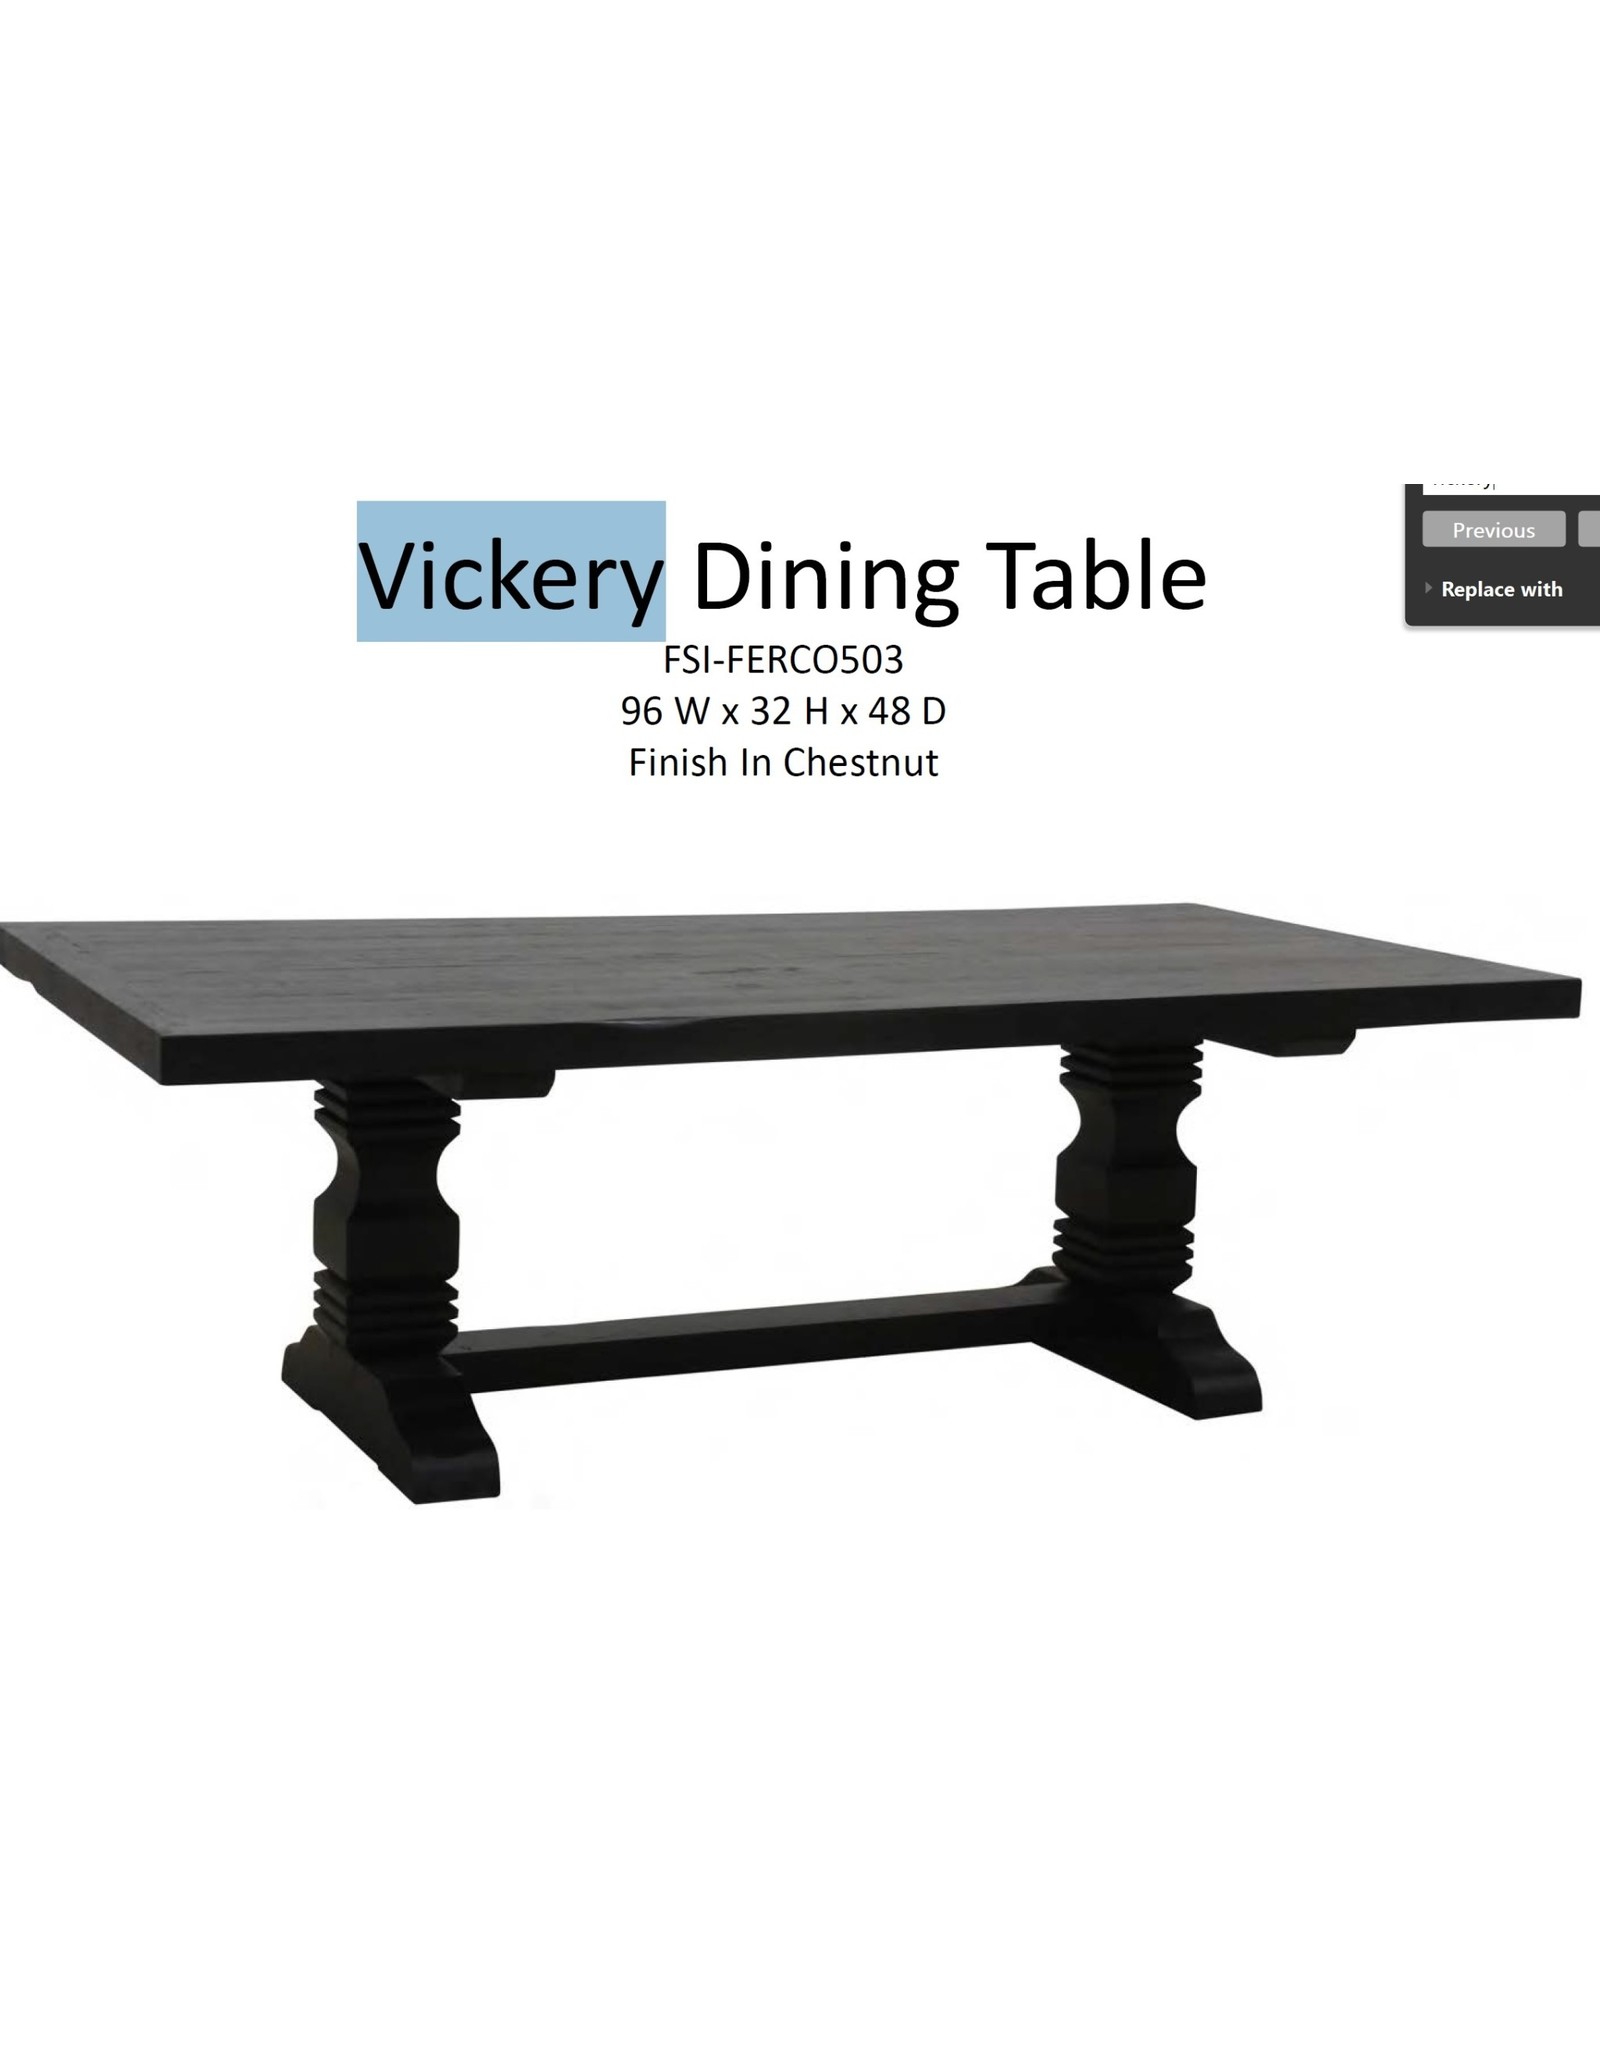 VICKERY DINING TABLE 96W 32H 48D CHESTNUT